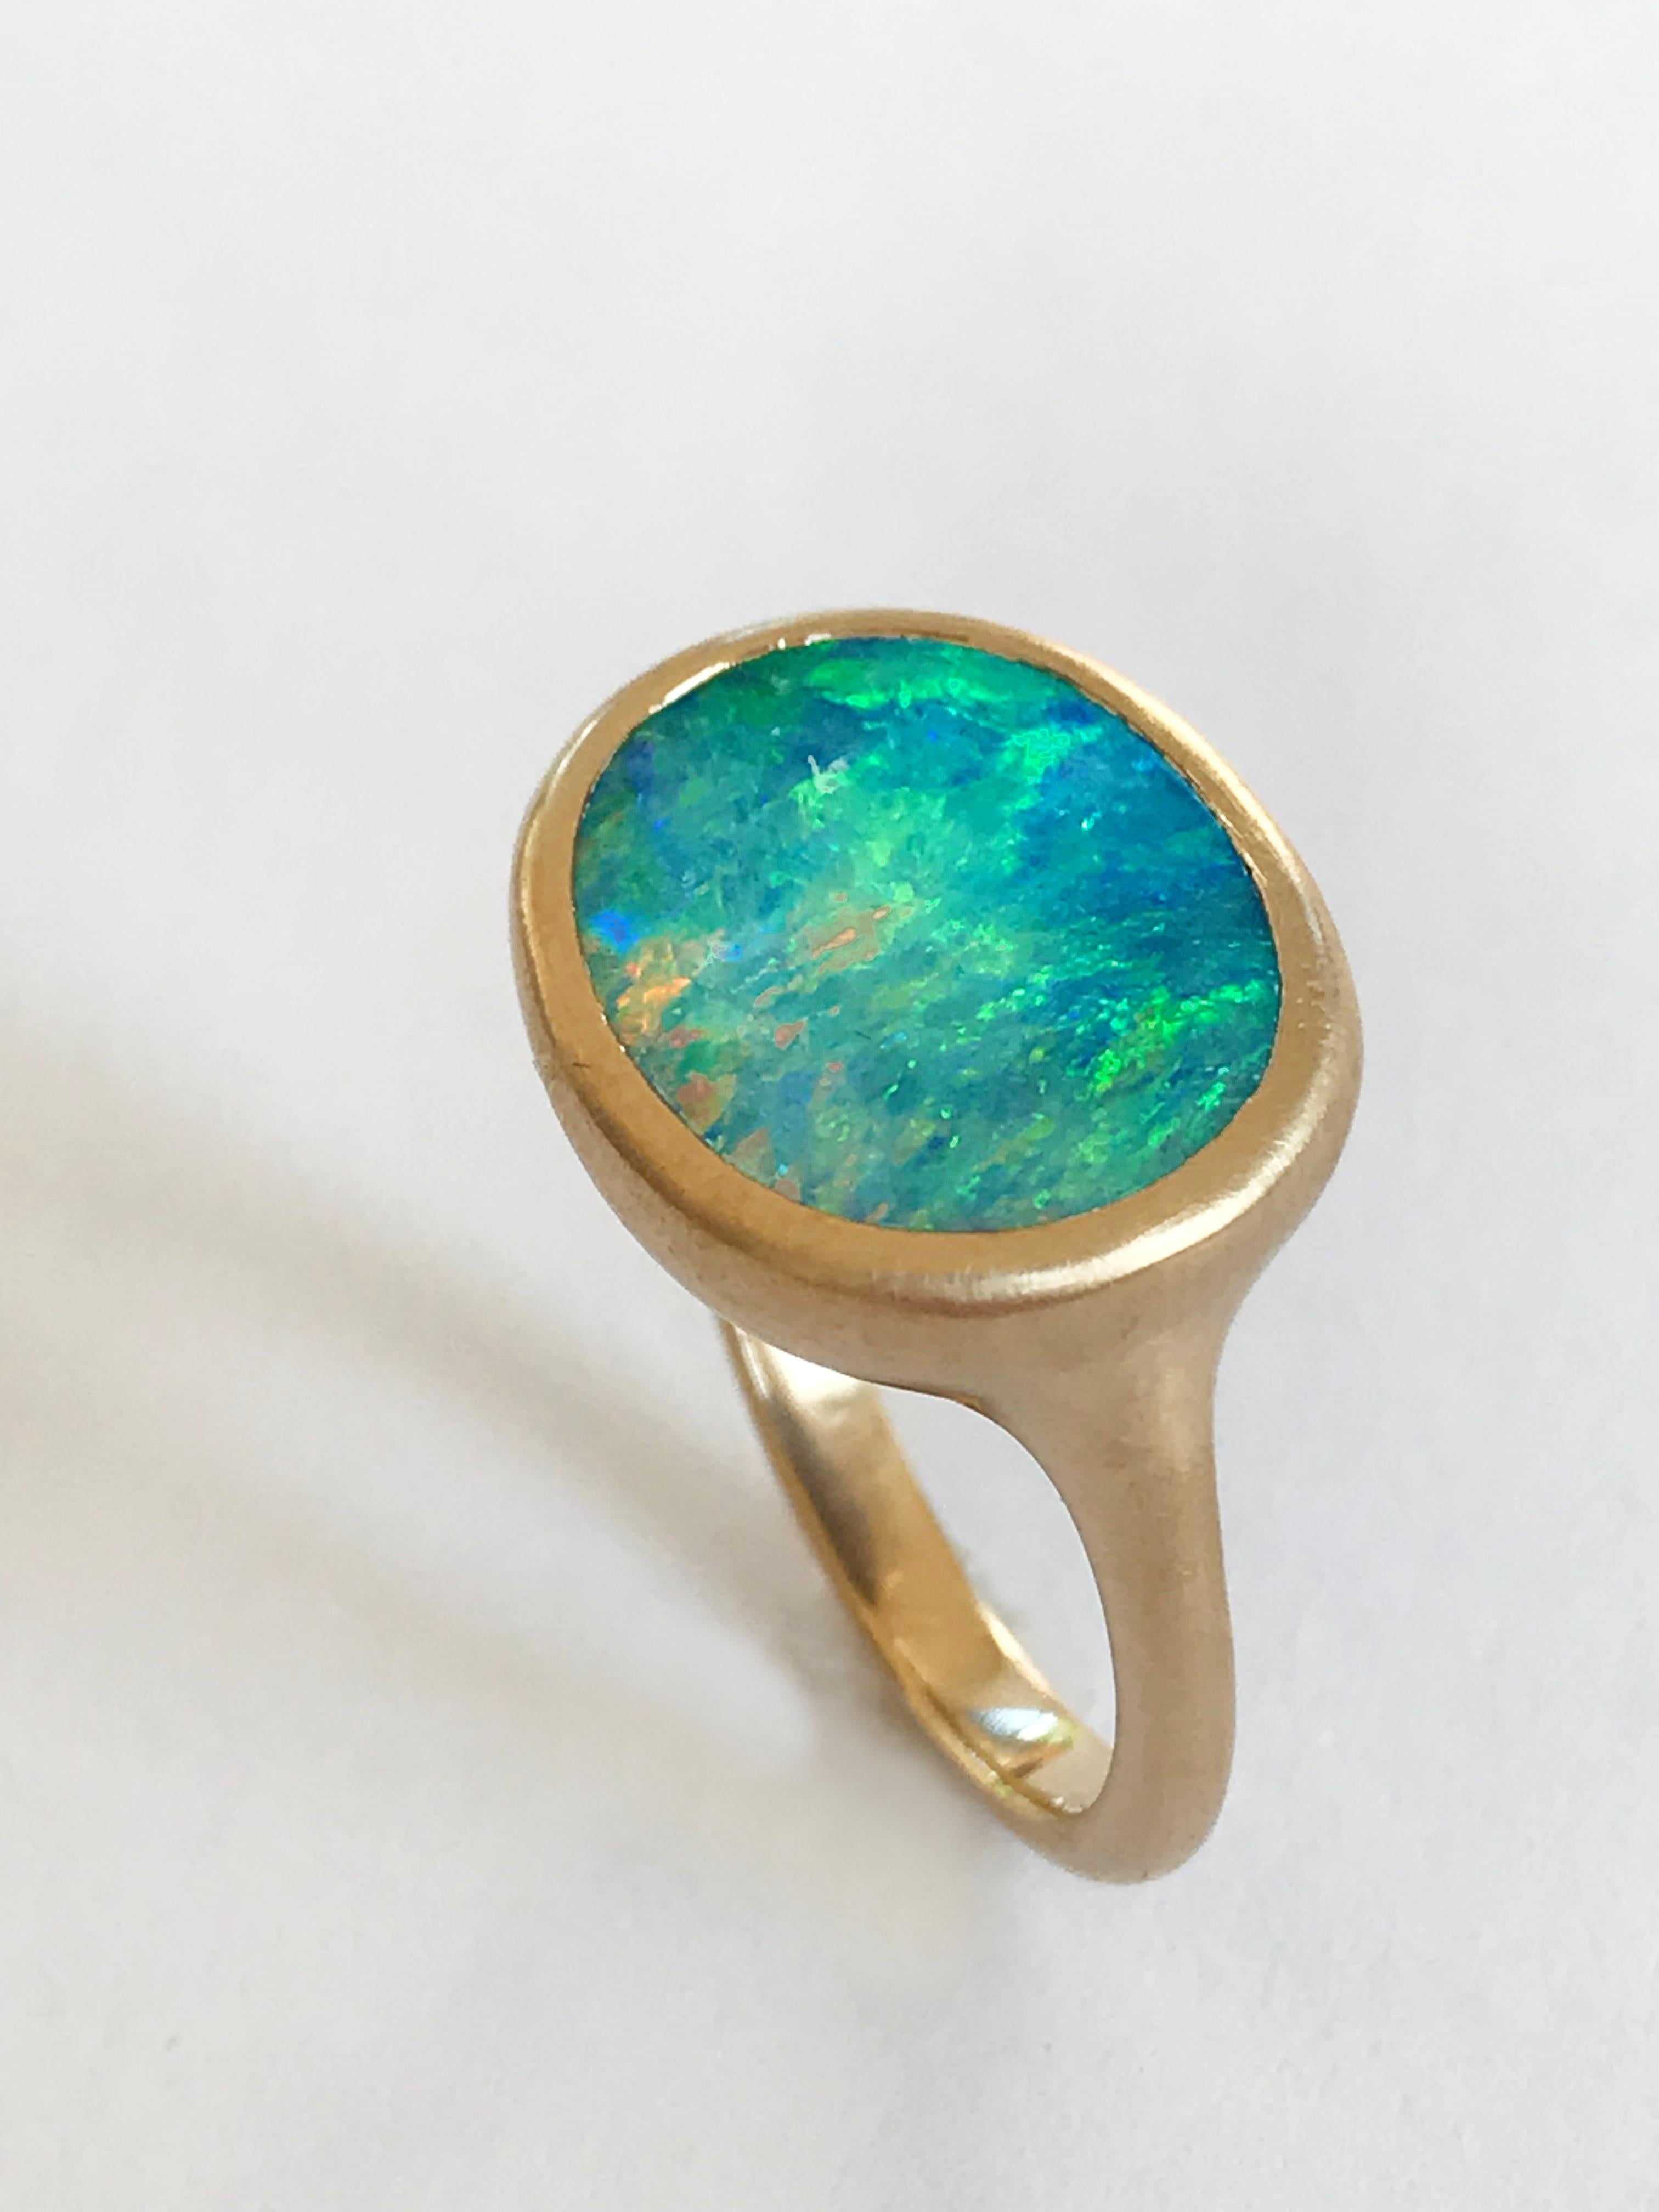 Dalben design One of a kind 18 kt yellow gold matte finishing ring with a 5,4 carat oval shape bezel-set wonderful light blue Australian Boulder Opal.  
The stone sea bed colors  are azure - green with  pink green and blue light spots.
Ring size 6